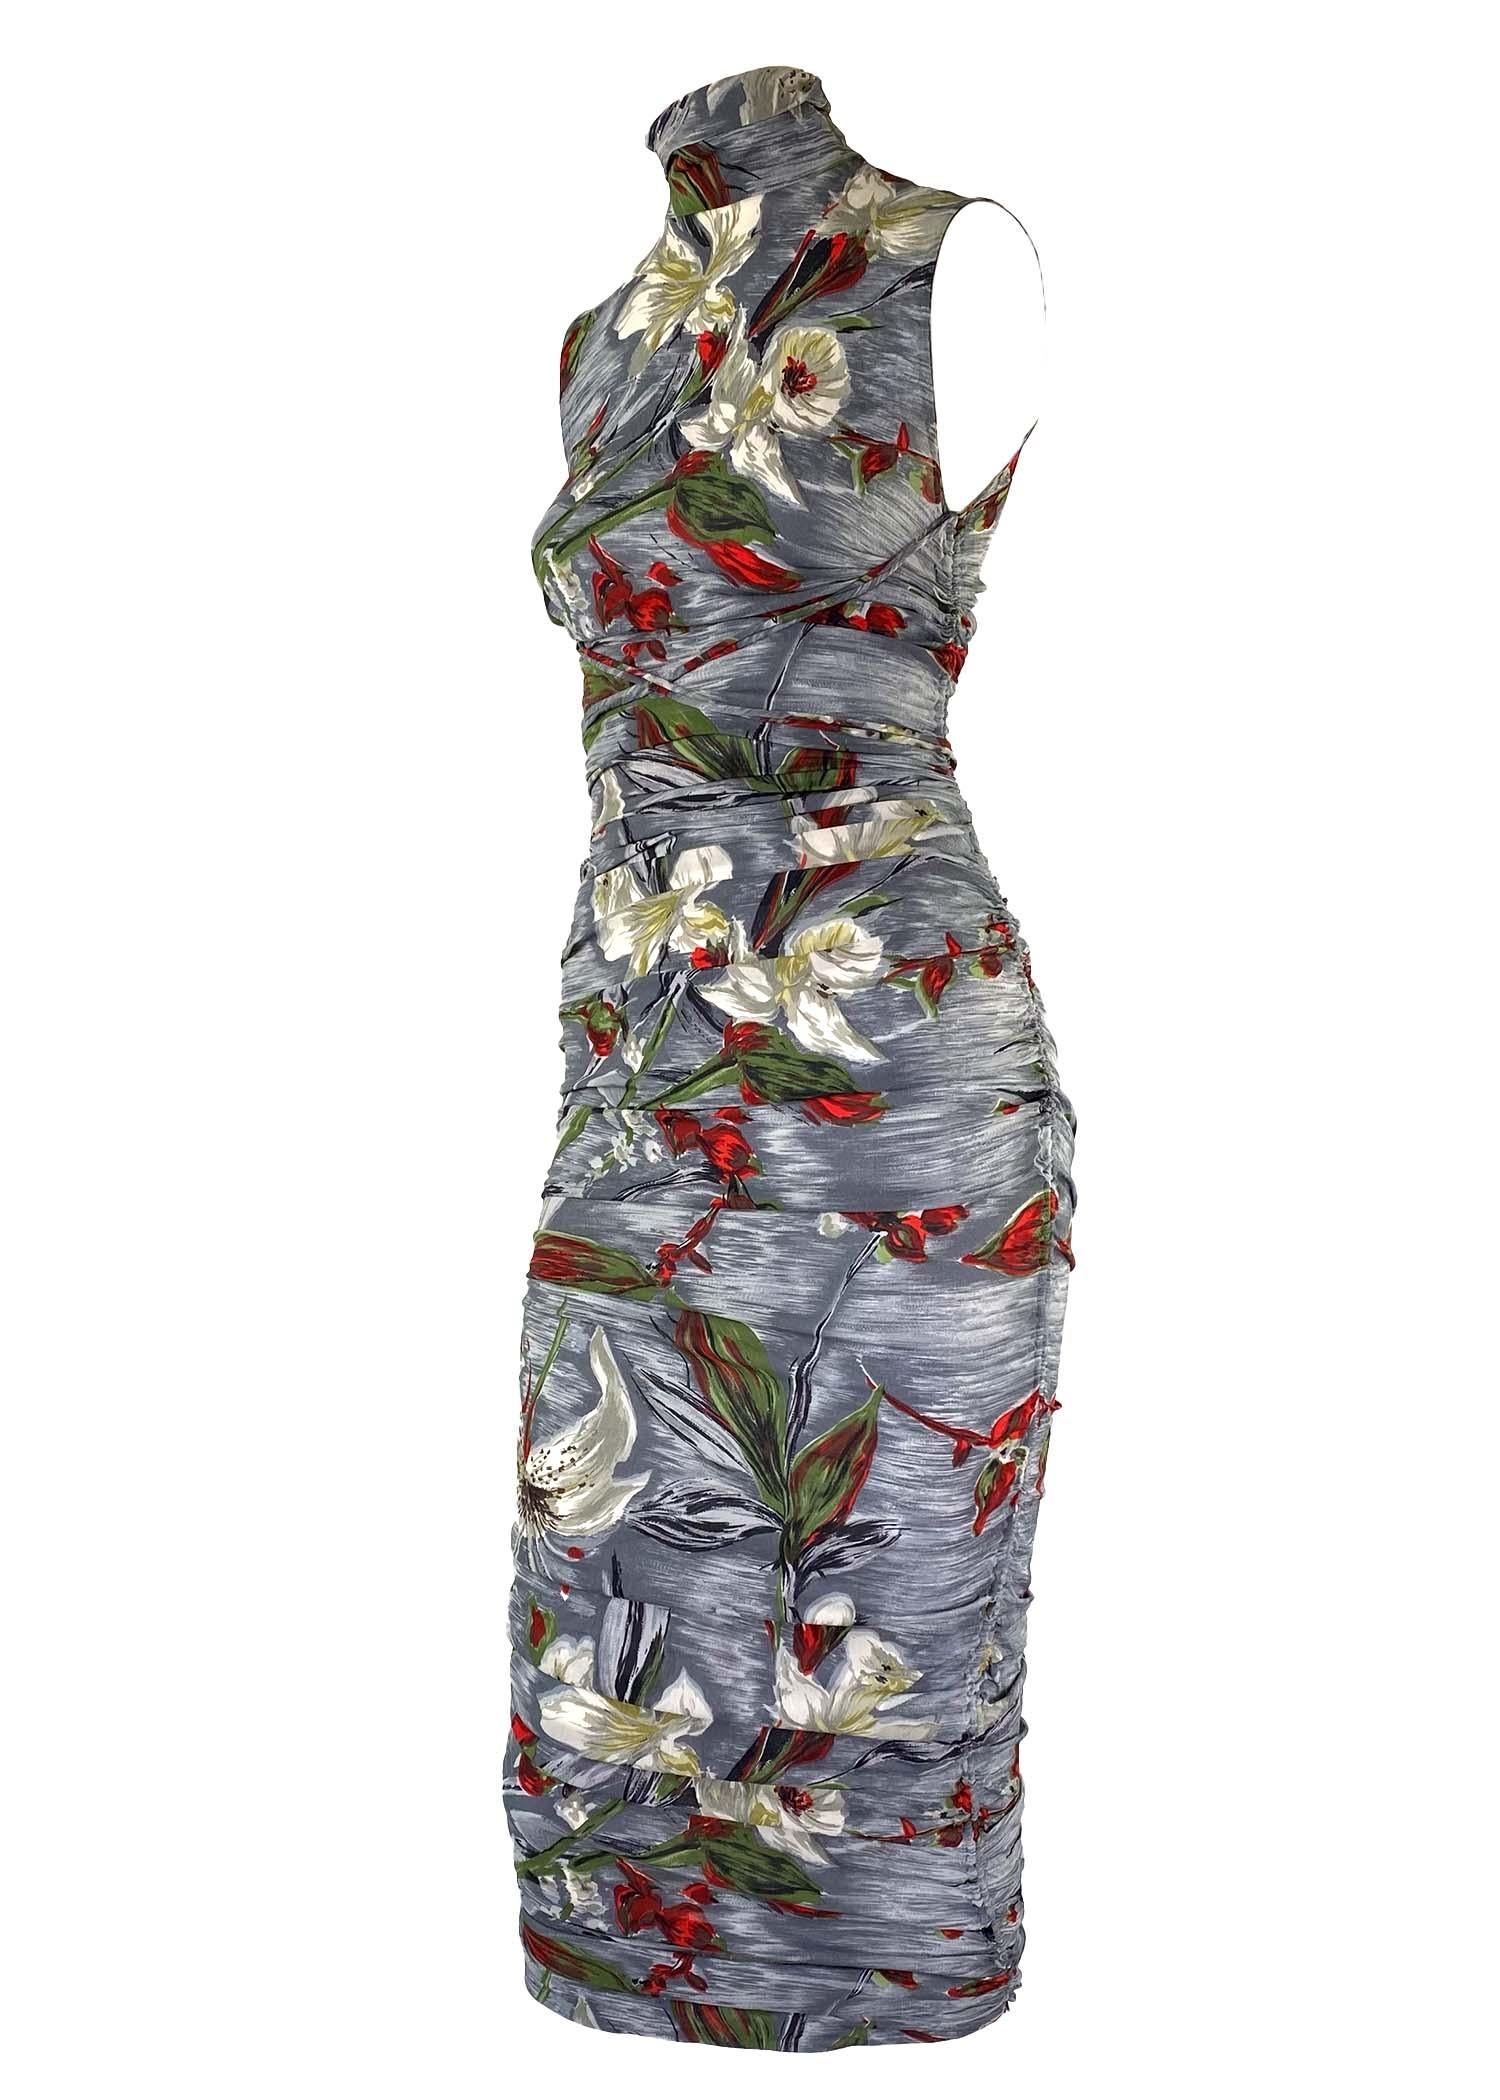 Women's S/S 2001 Dolce & Gabbana Ruched Grey Silk Floral Printed Runway Dress For Sale